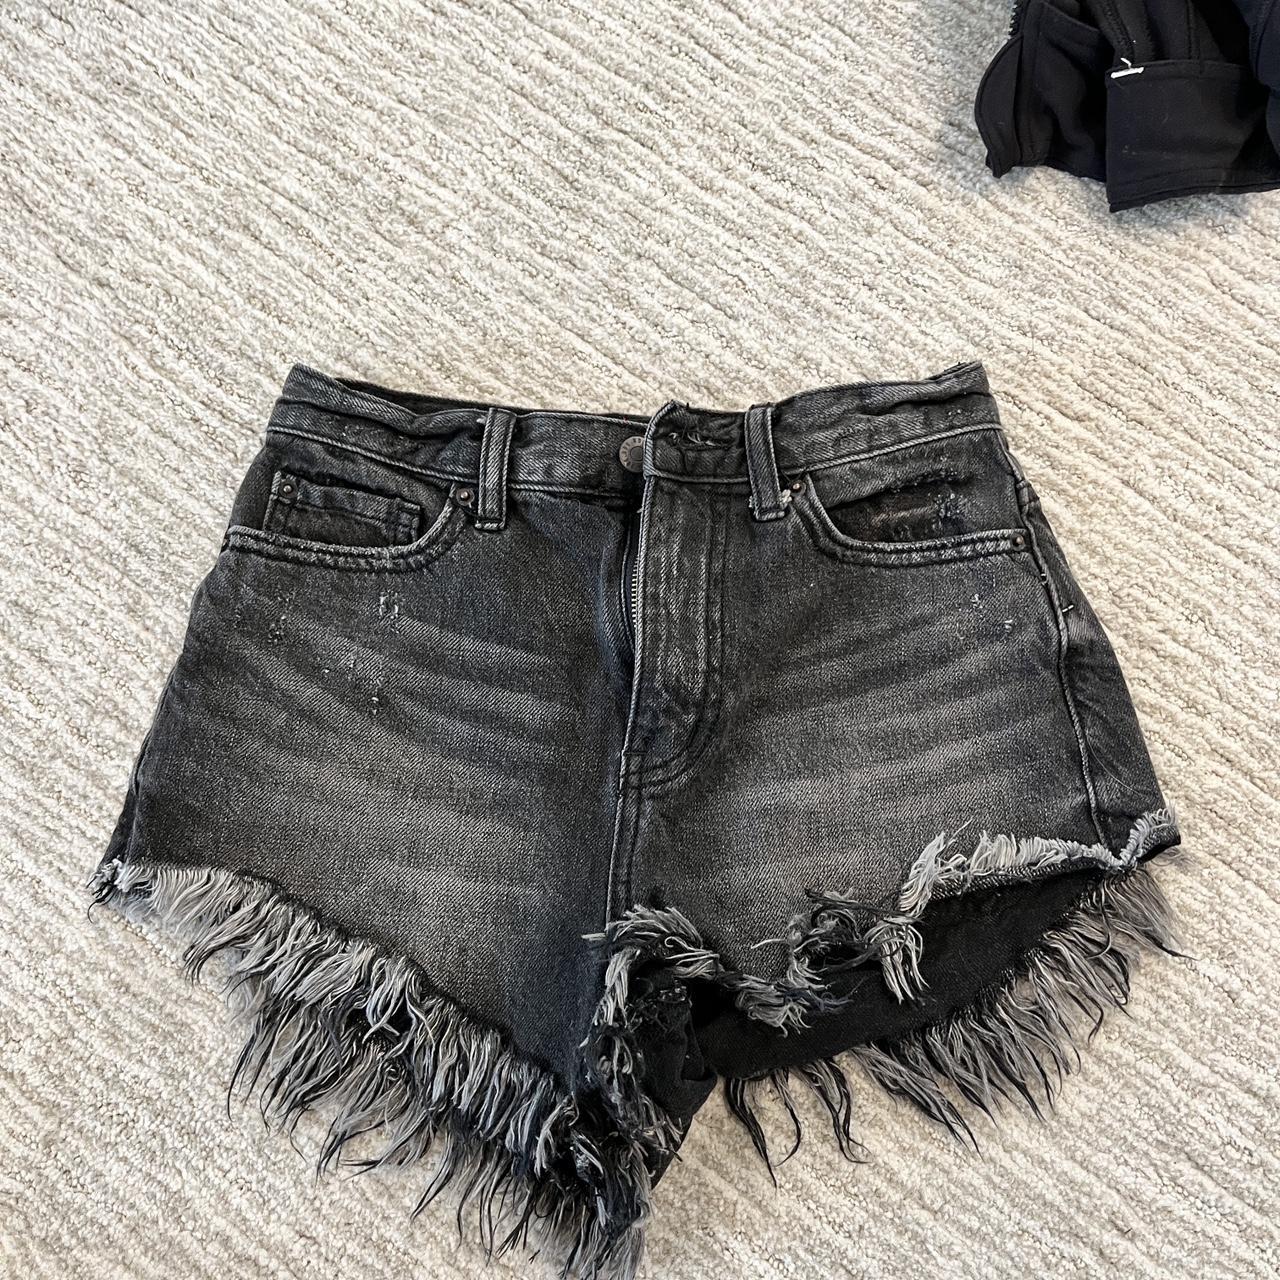 Urban Outfitters Women's Black Shorts